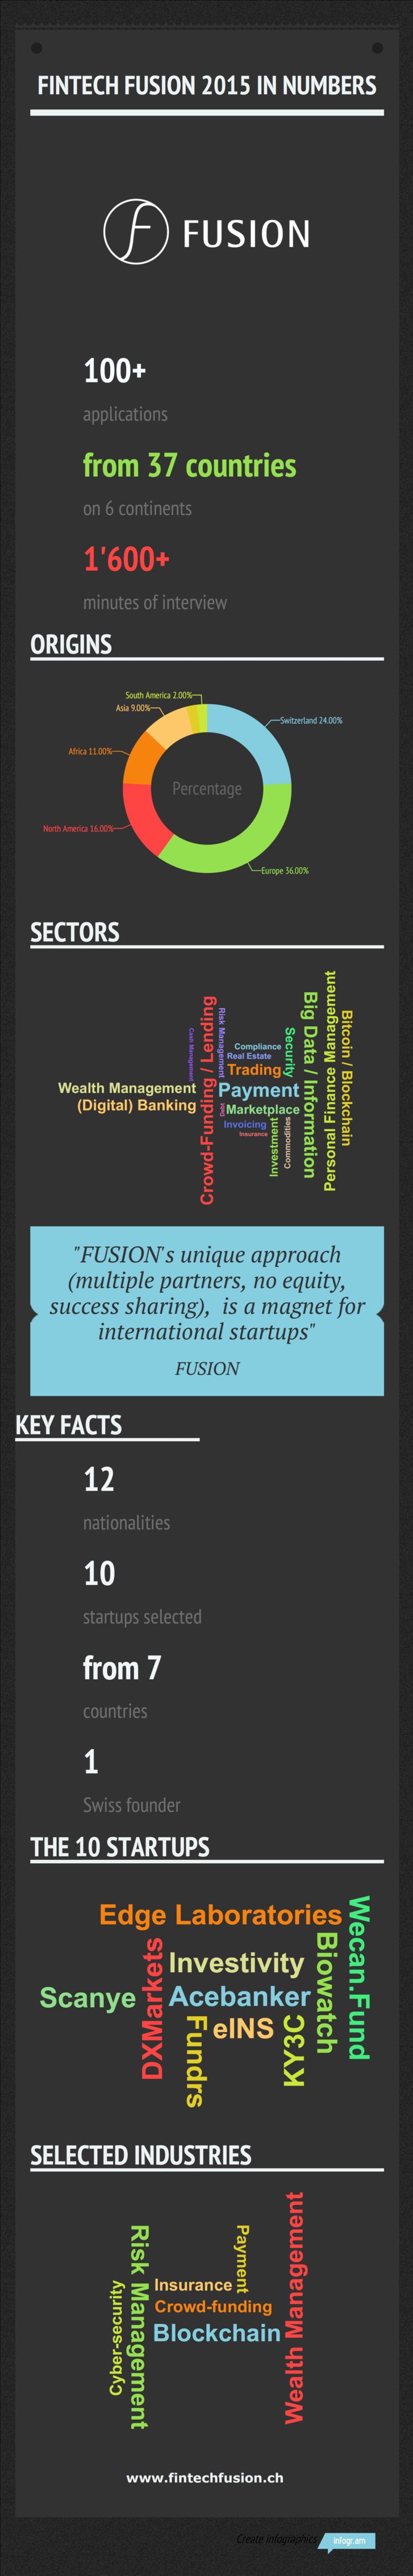 FUSION, Switzerland’s first fintech accelerator, selects its first intake